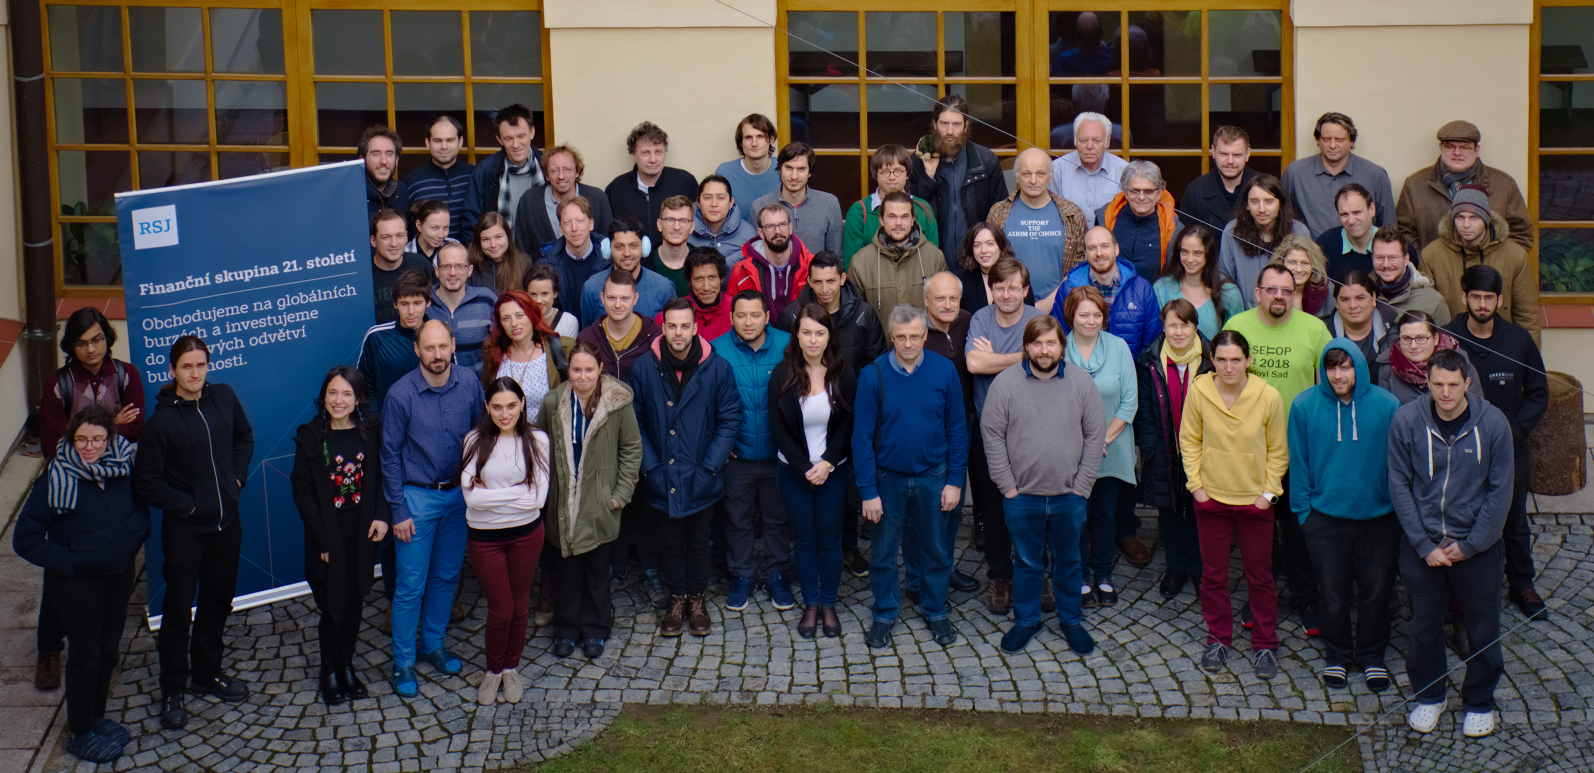 Group photo of the participants of the WS 2019